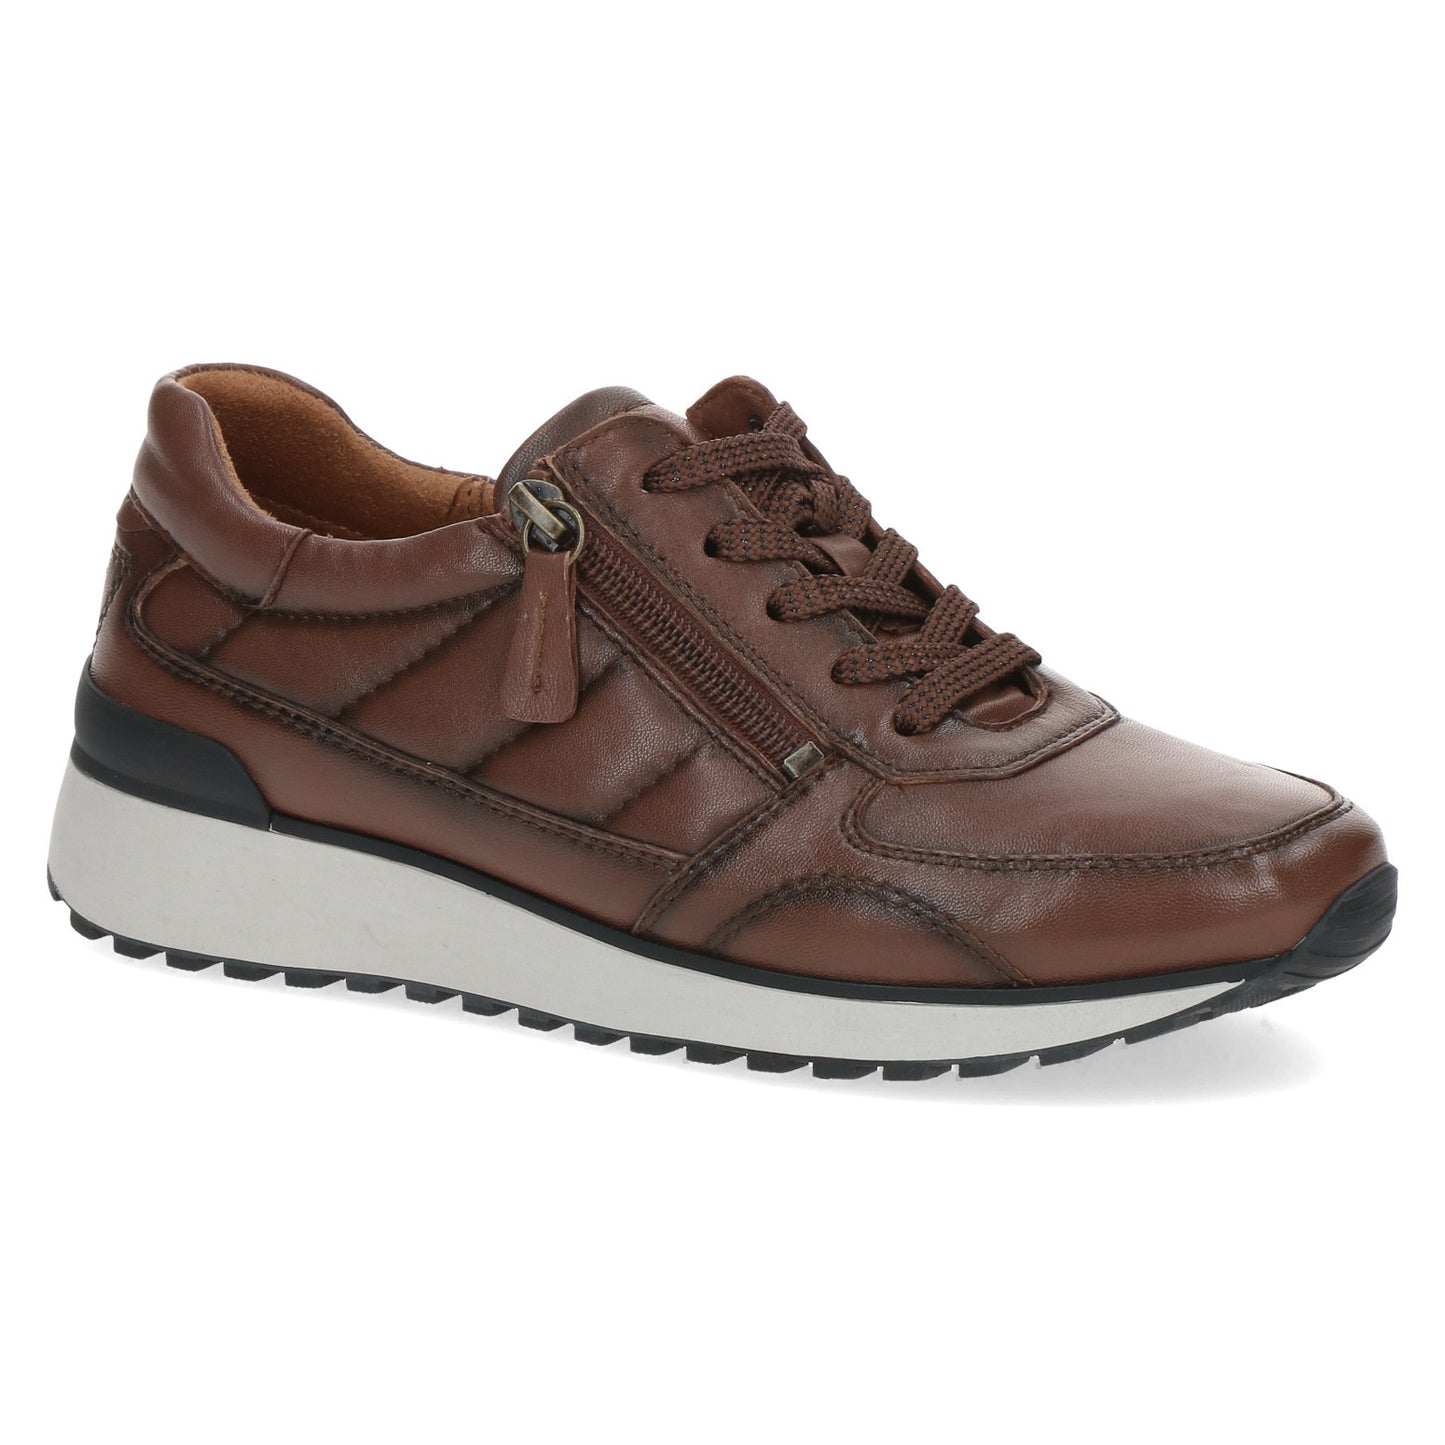 Caprice 9-23701-41 331 Muscat Trainers